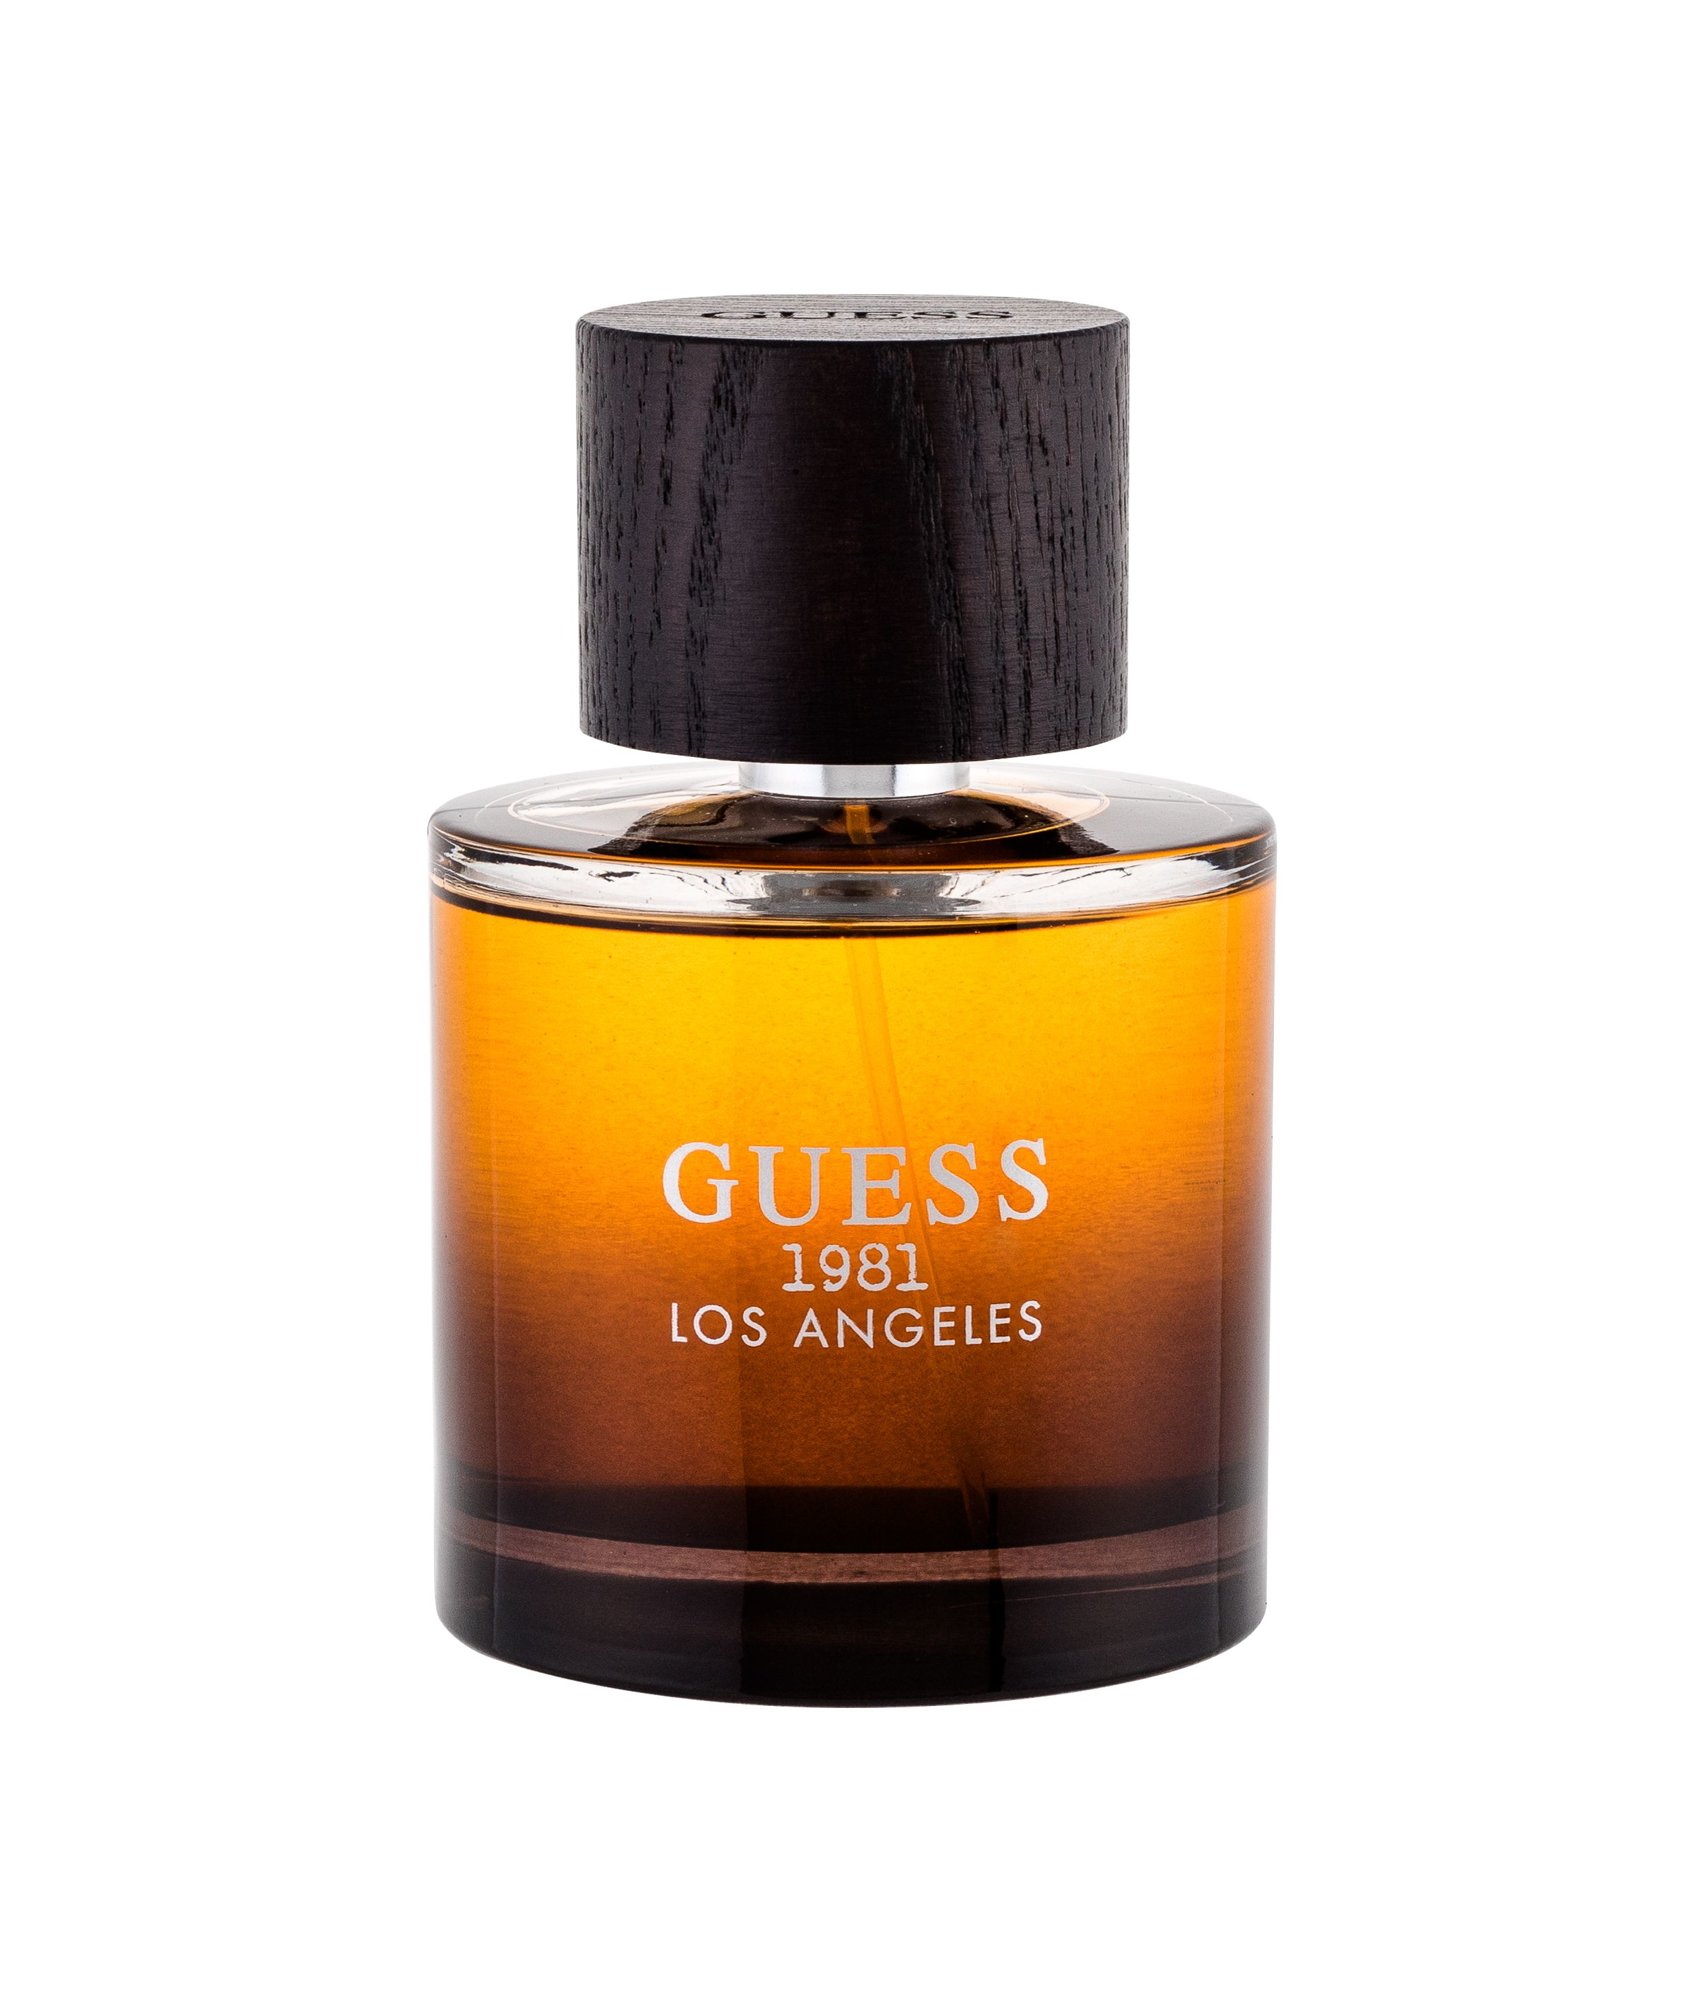 GUESS Guess 1981 Los Angeles, Toaletní voda 100ml